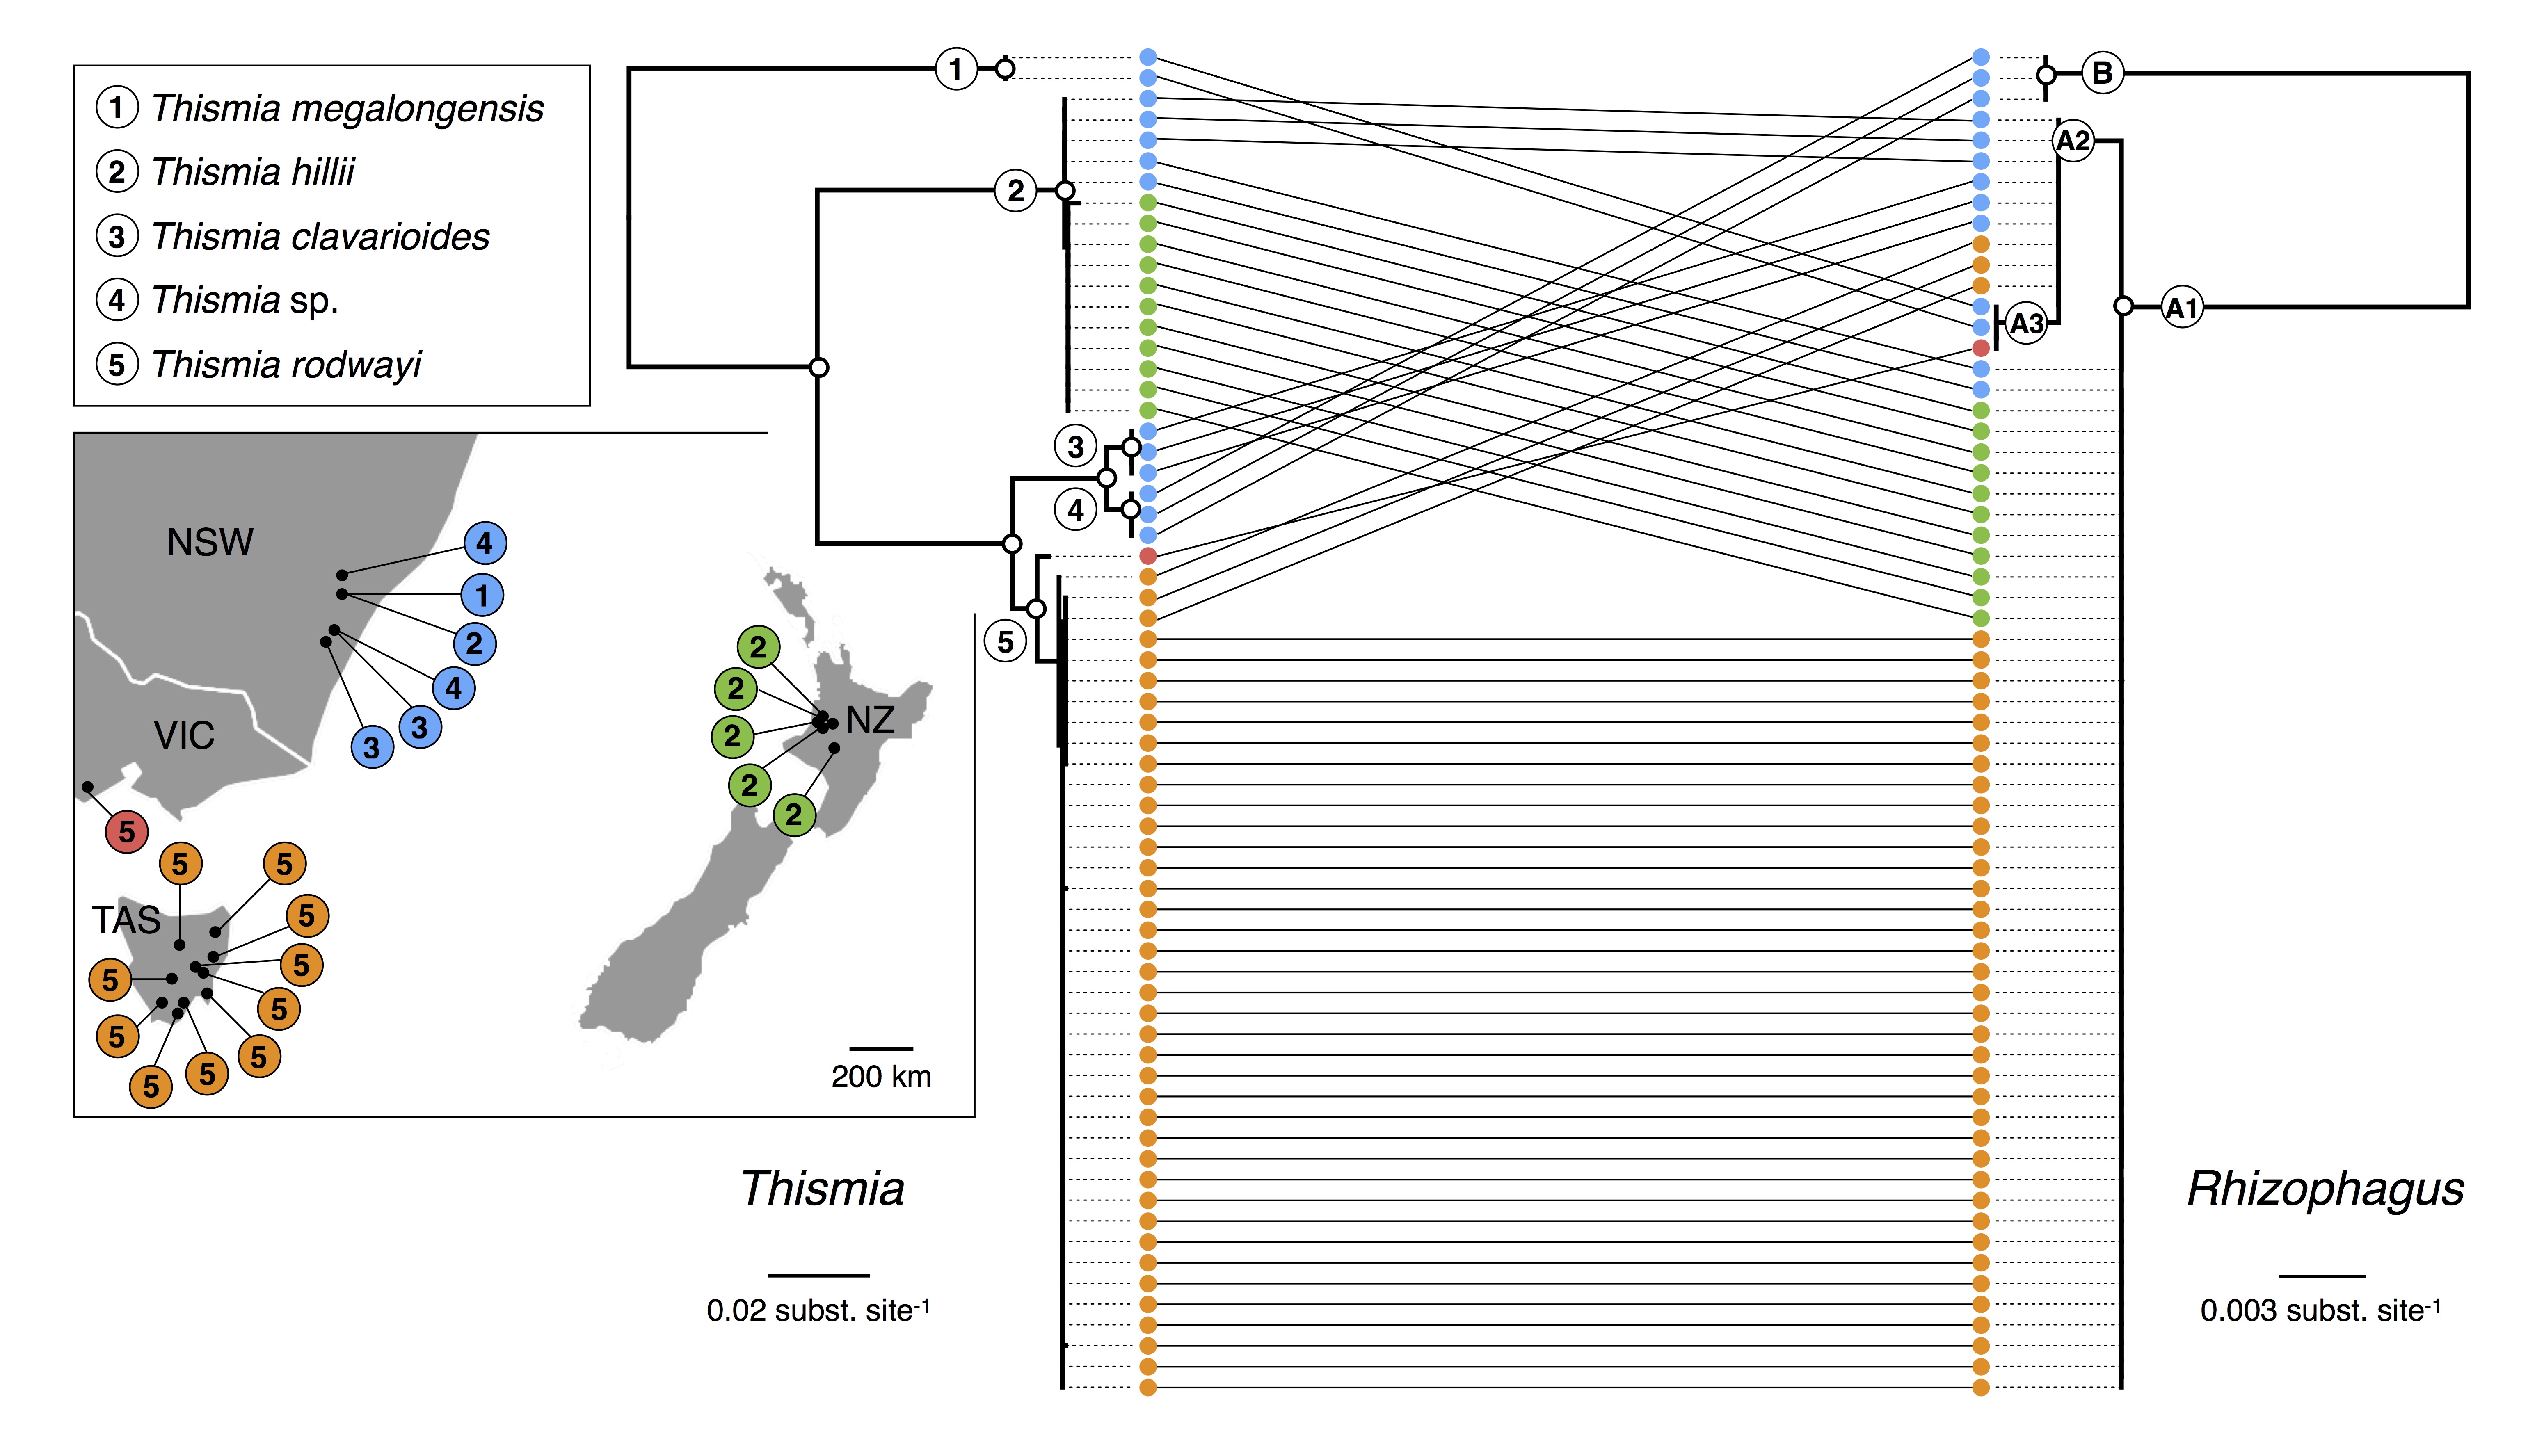 The biogeographic history of below-ground interactions: Thismia in